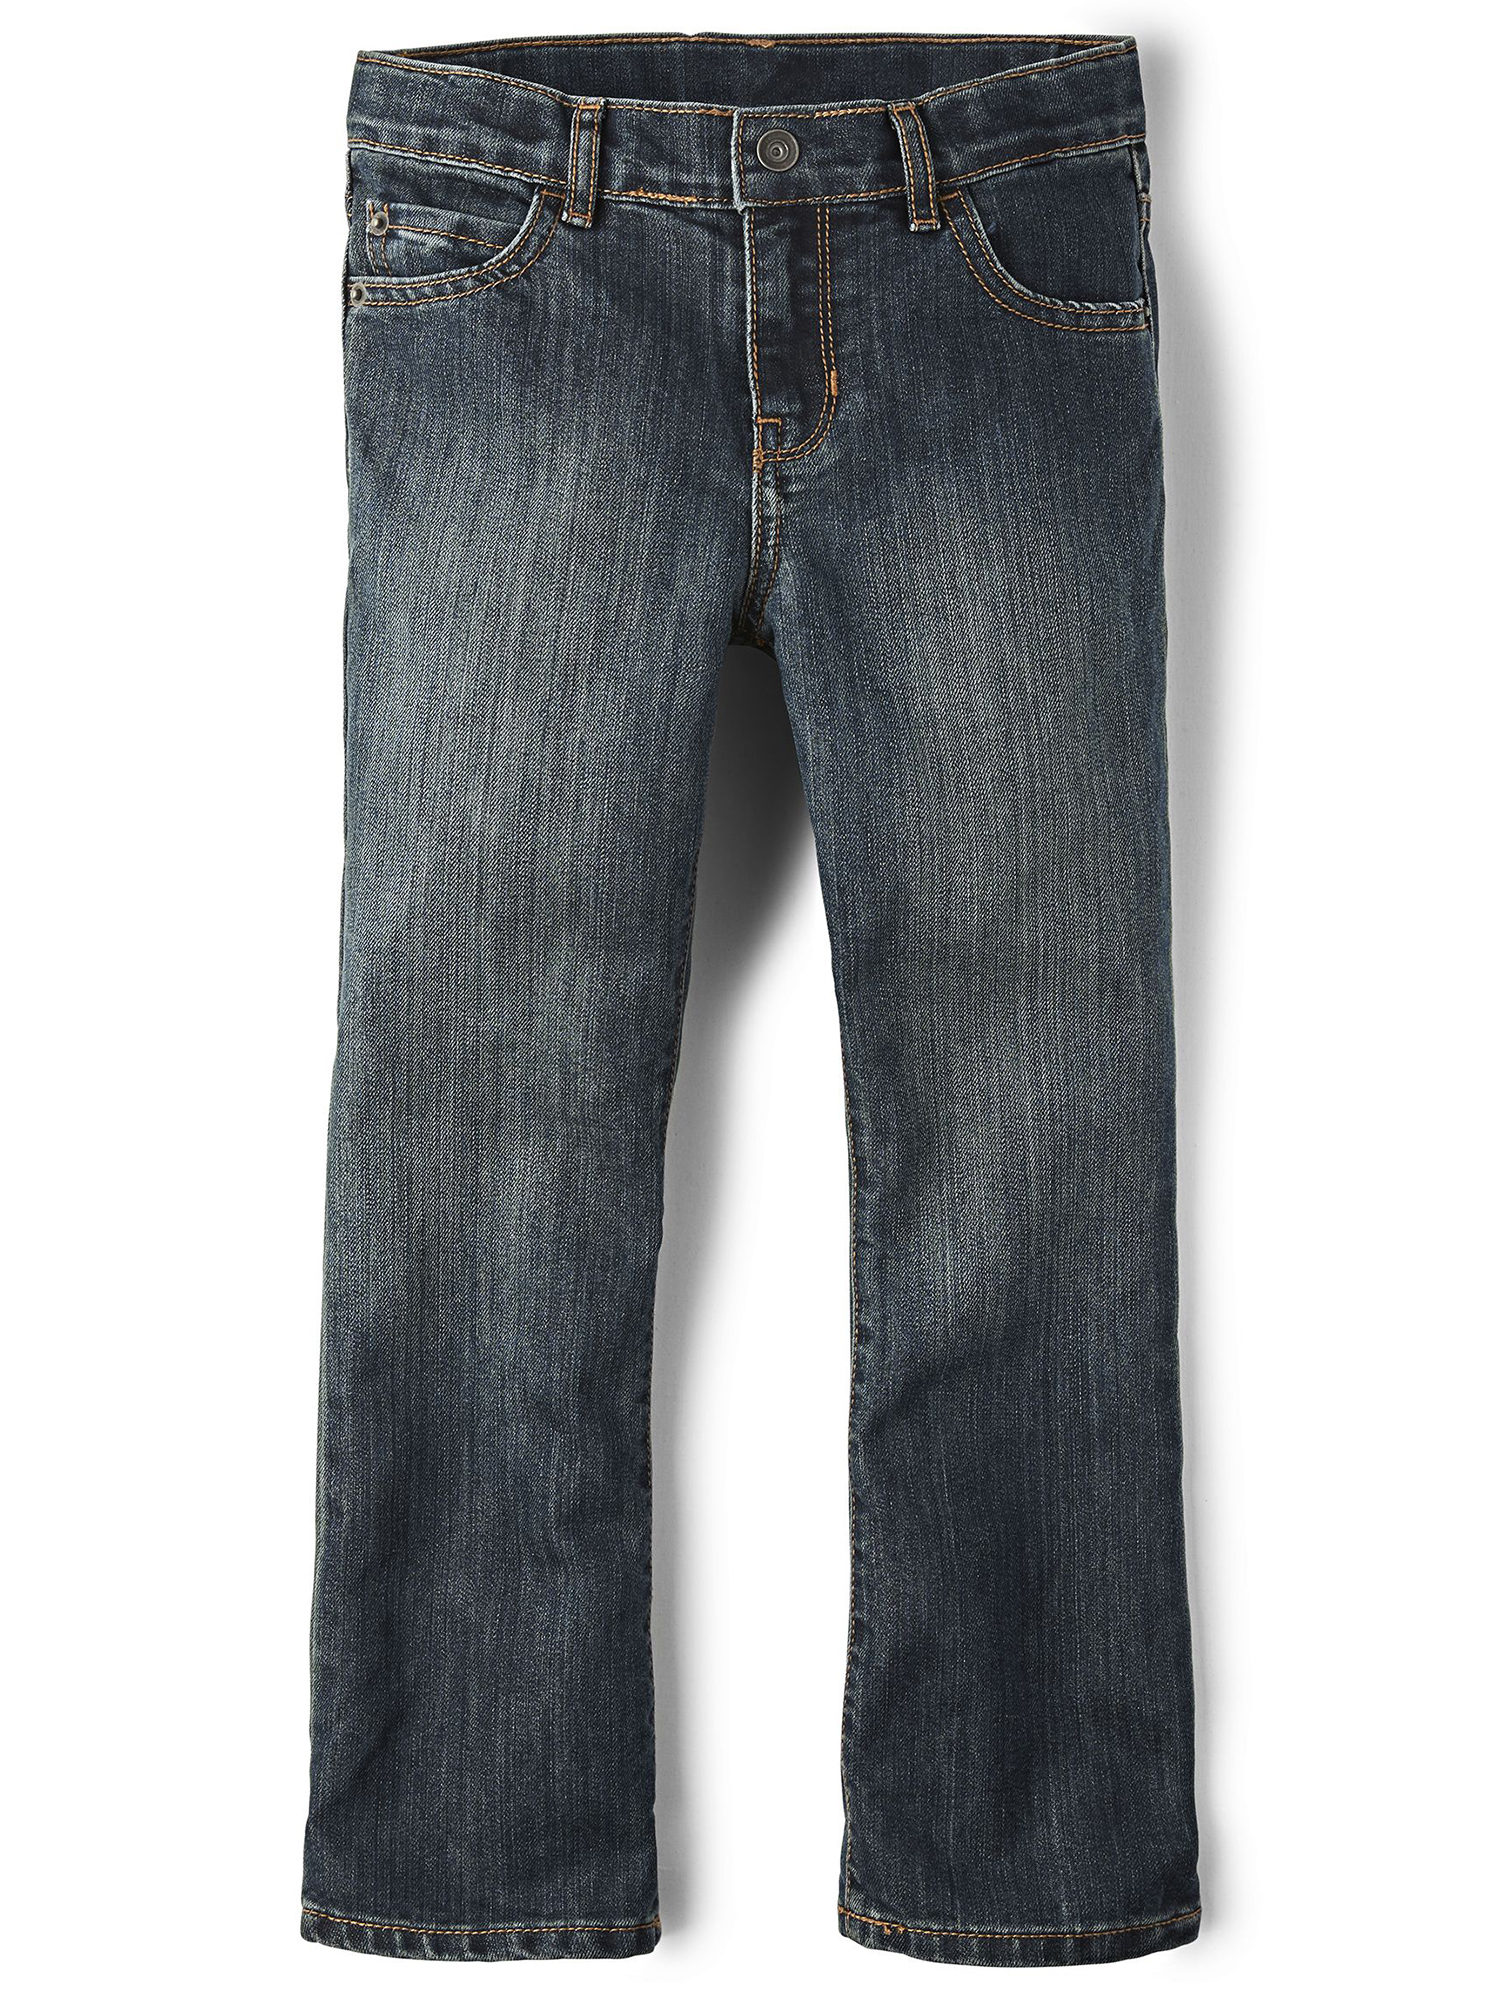 The Children's Place Big Boy's Bootcut Jeans - image 1 of 4